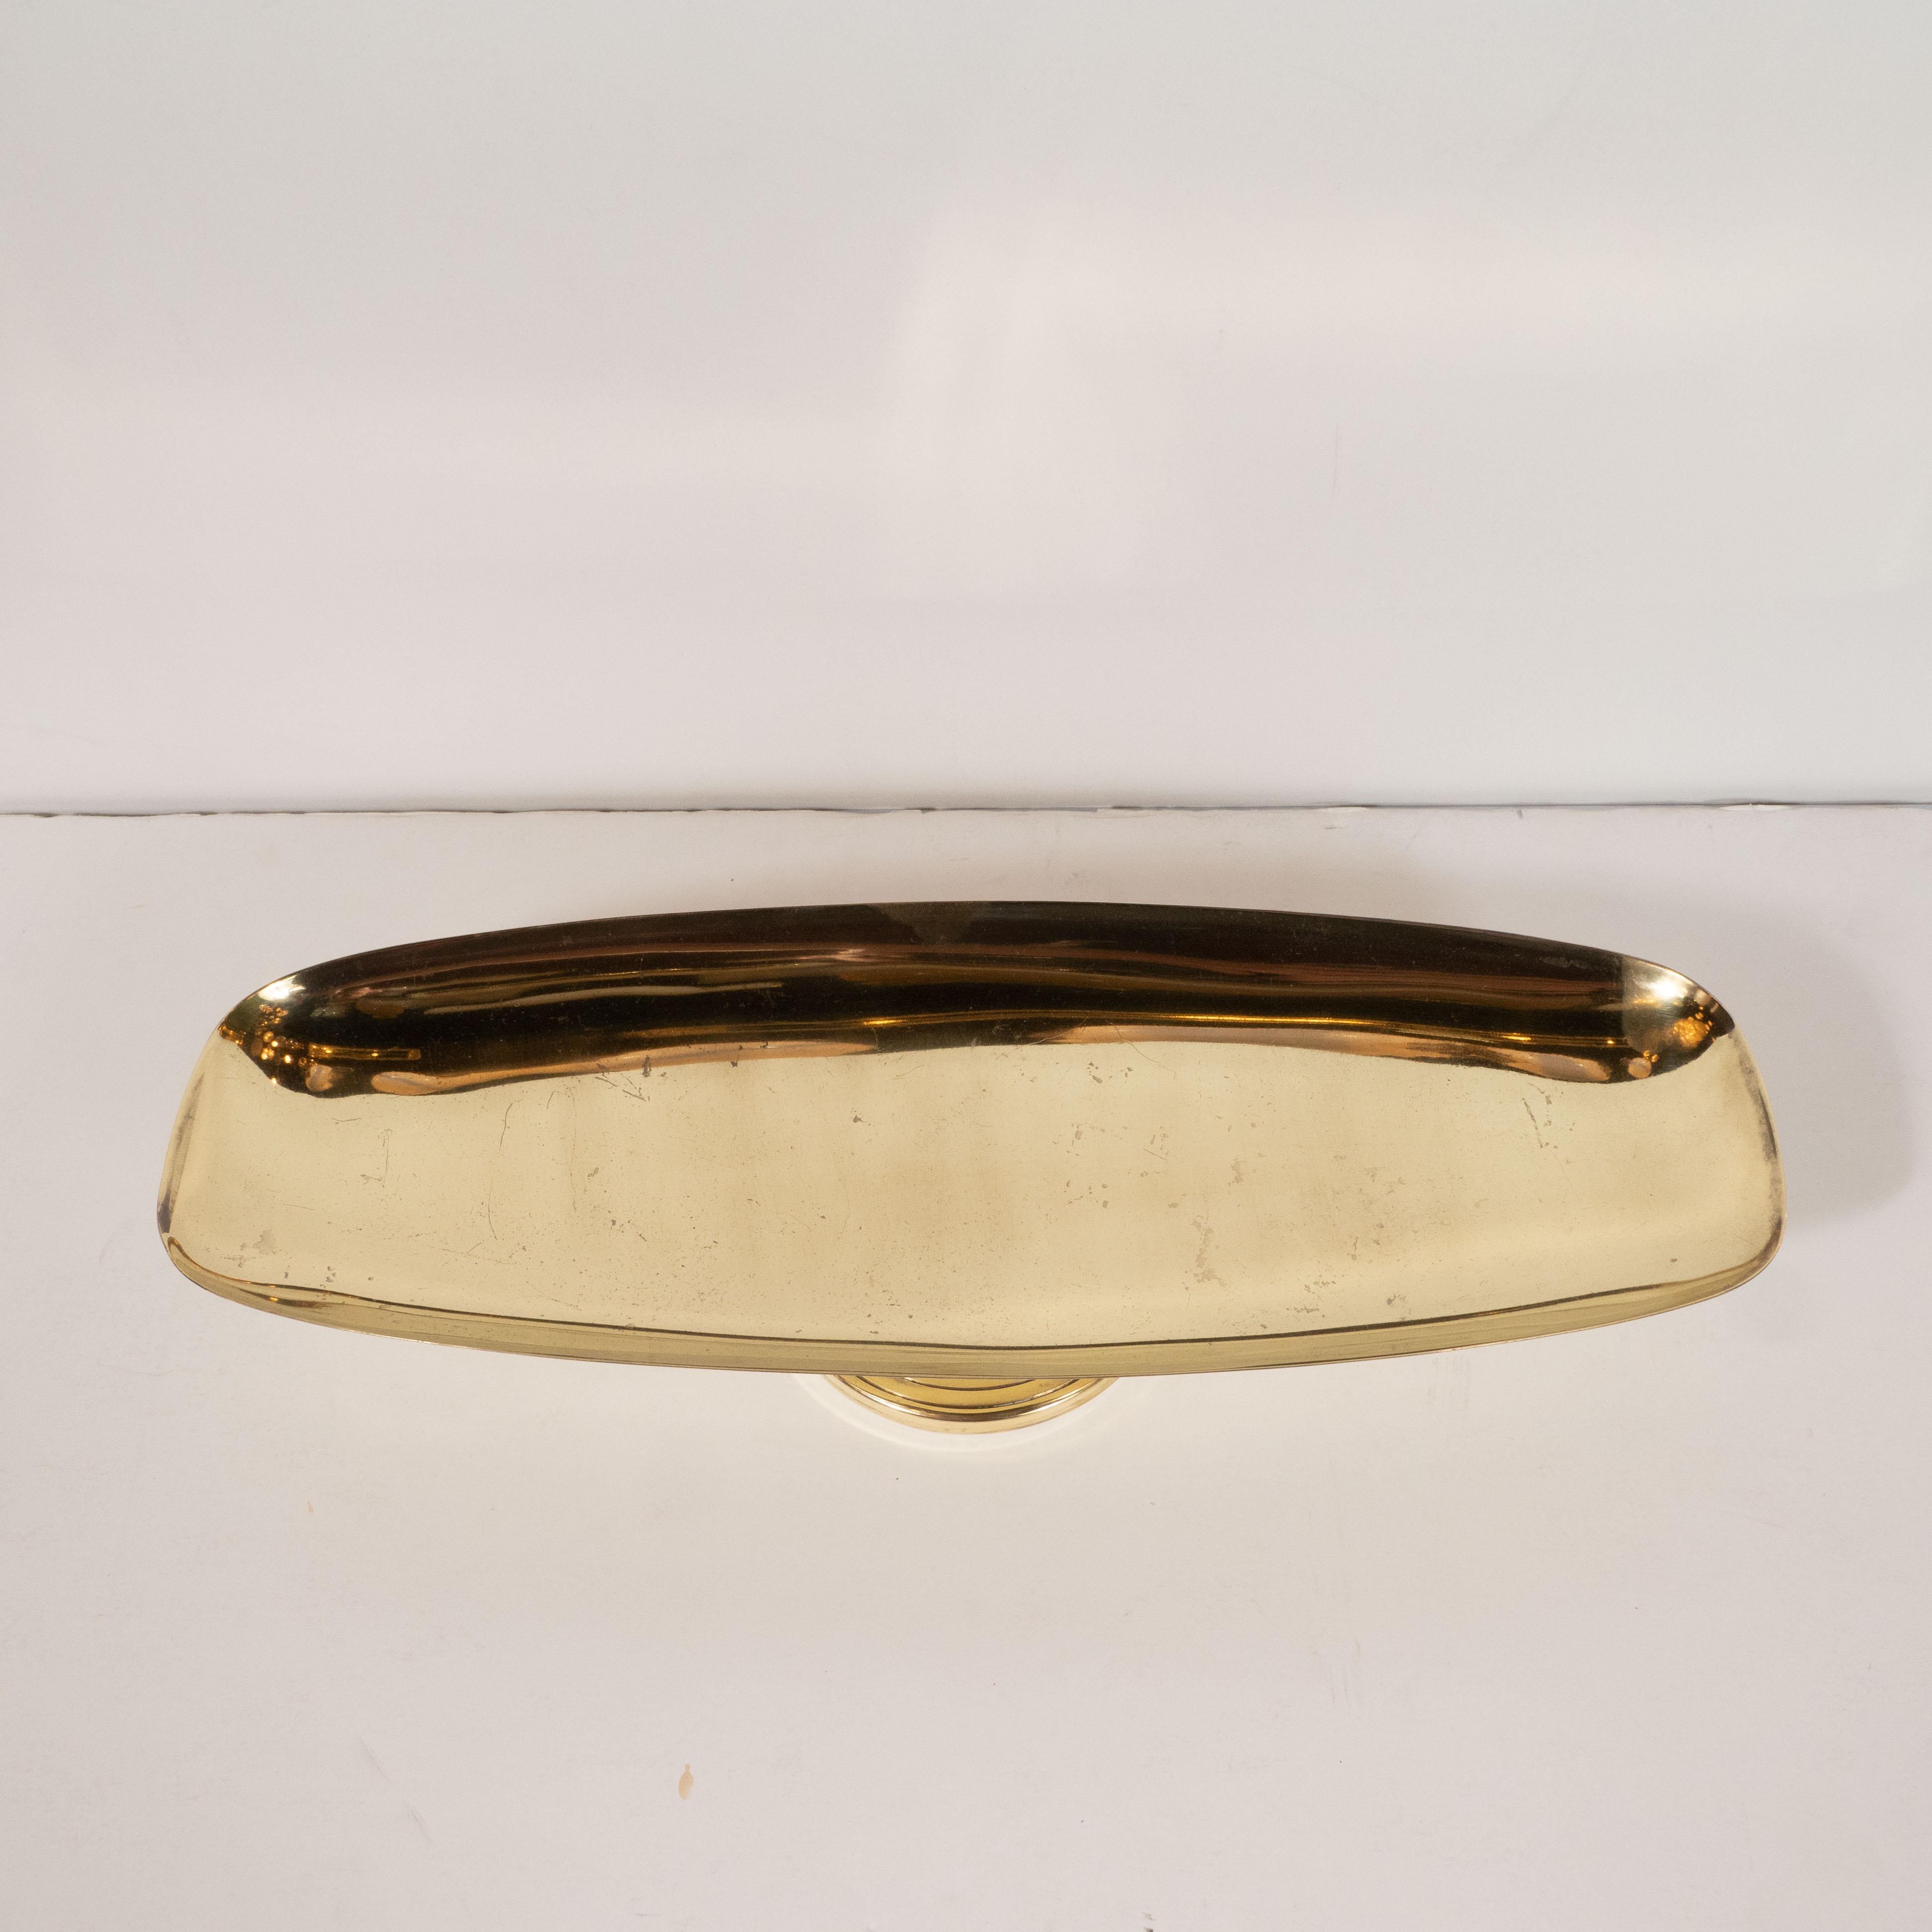 Mid-20th Century Mid-Century Modern Oval Brass Dish by Tommi Parzinger for Dorlyn Silversmiths